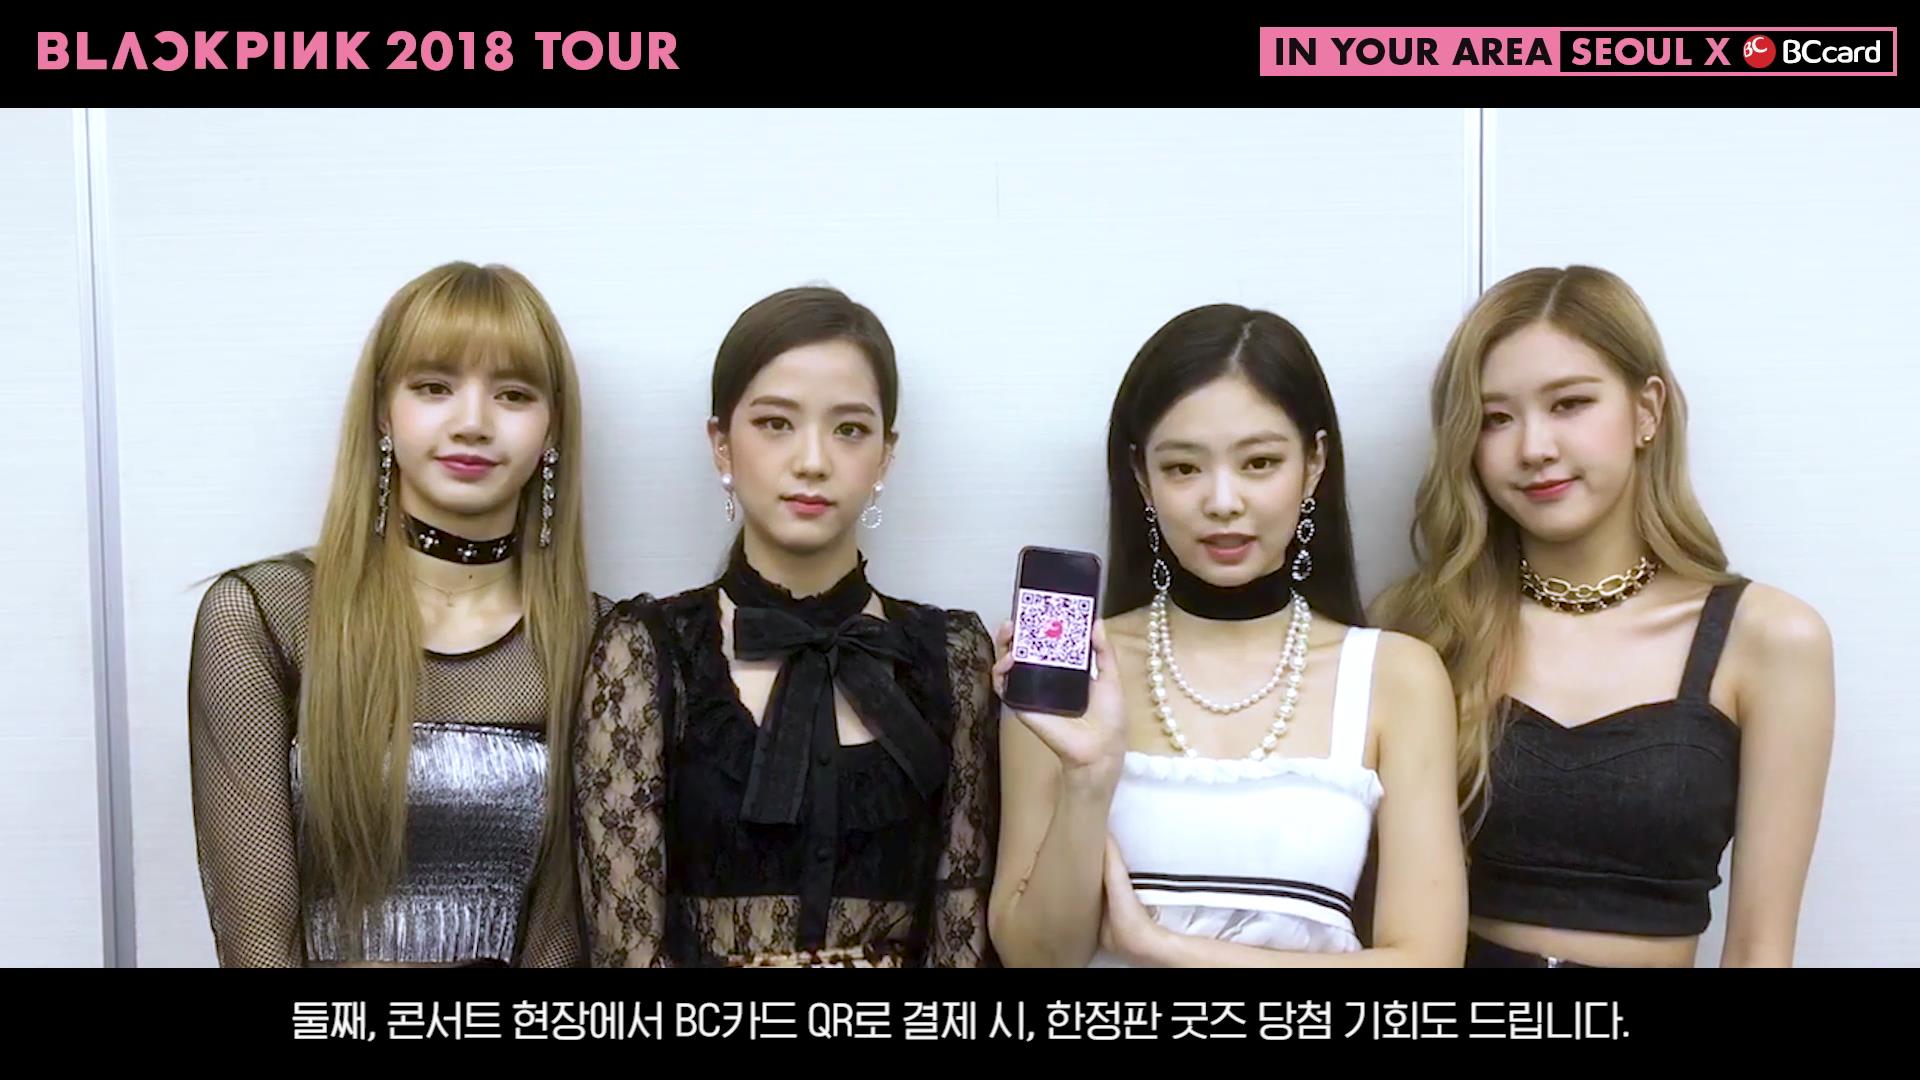 BLACKPINK - 2018 TOUR [IN YOUR AREA] SEOUL X BC CARD